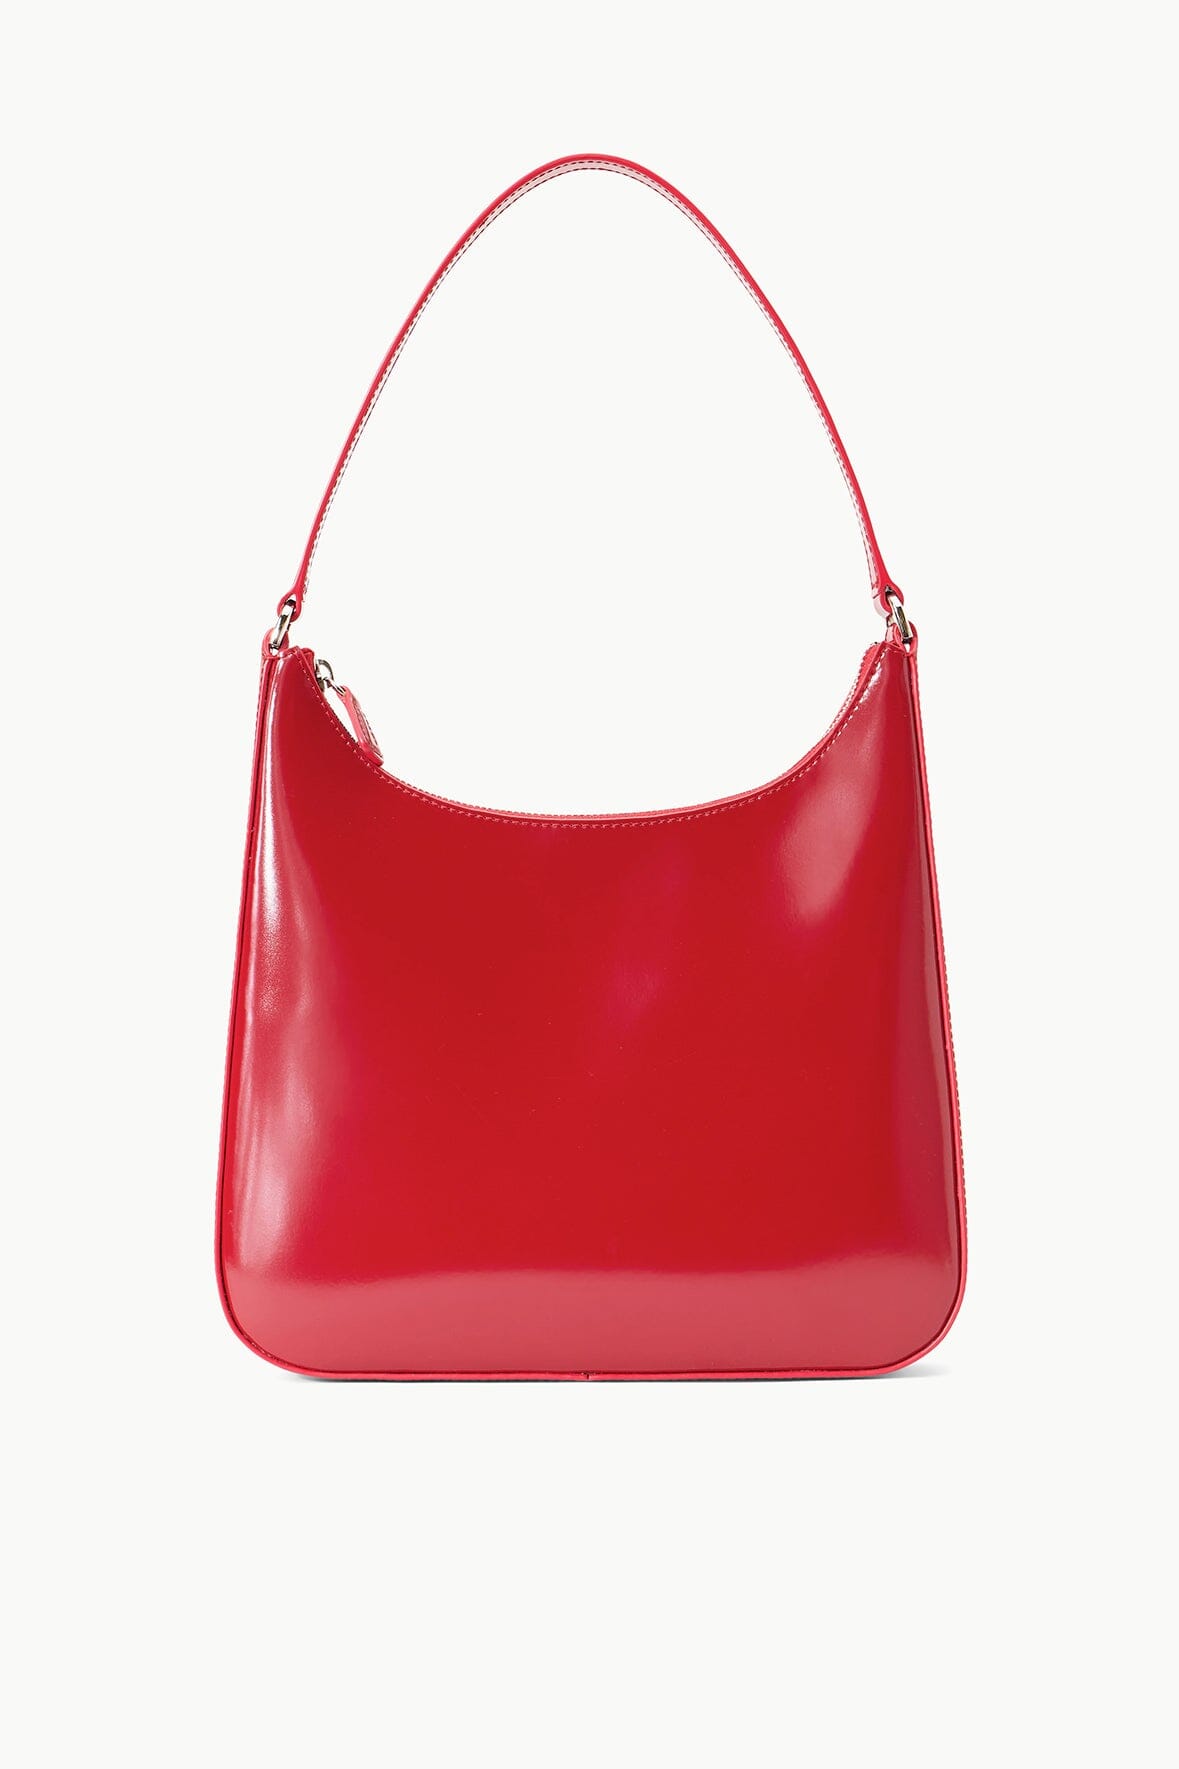 Why you need a red bag in your collection